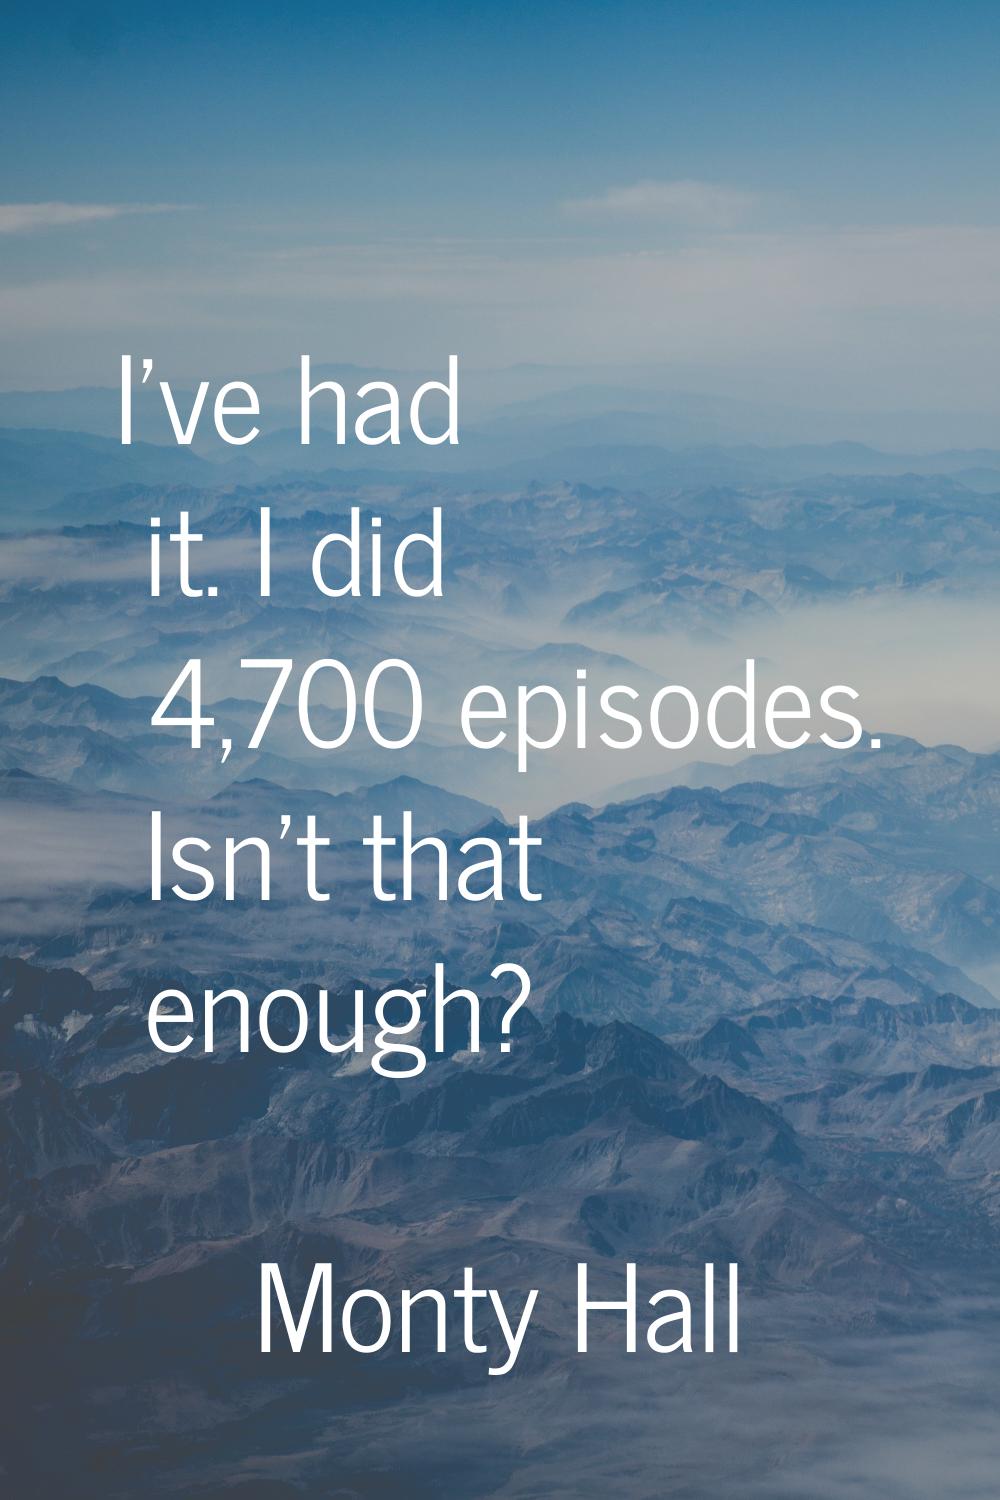 I've had it. I did 4,700 episodes. Isn't that enough?